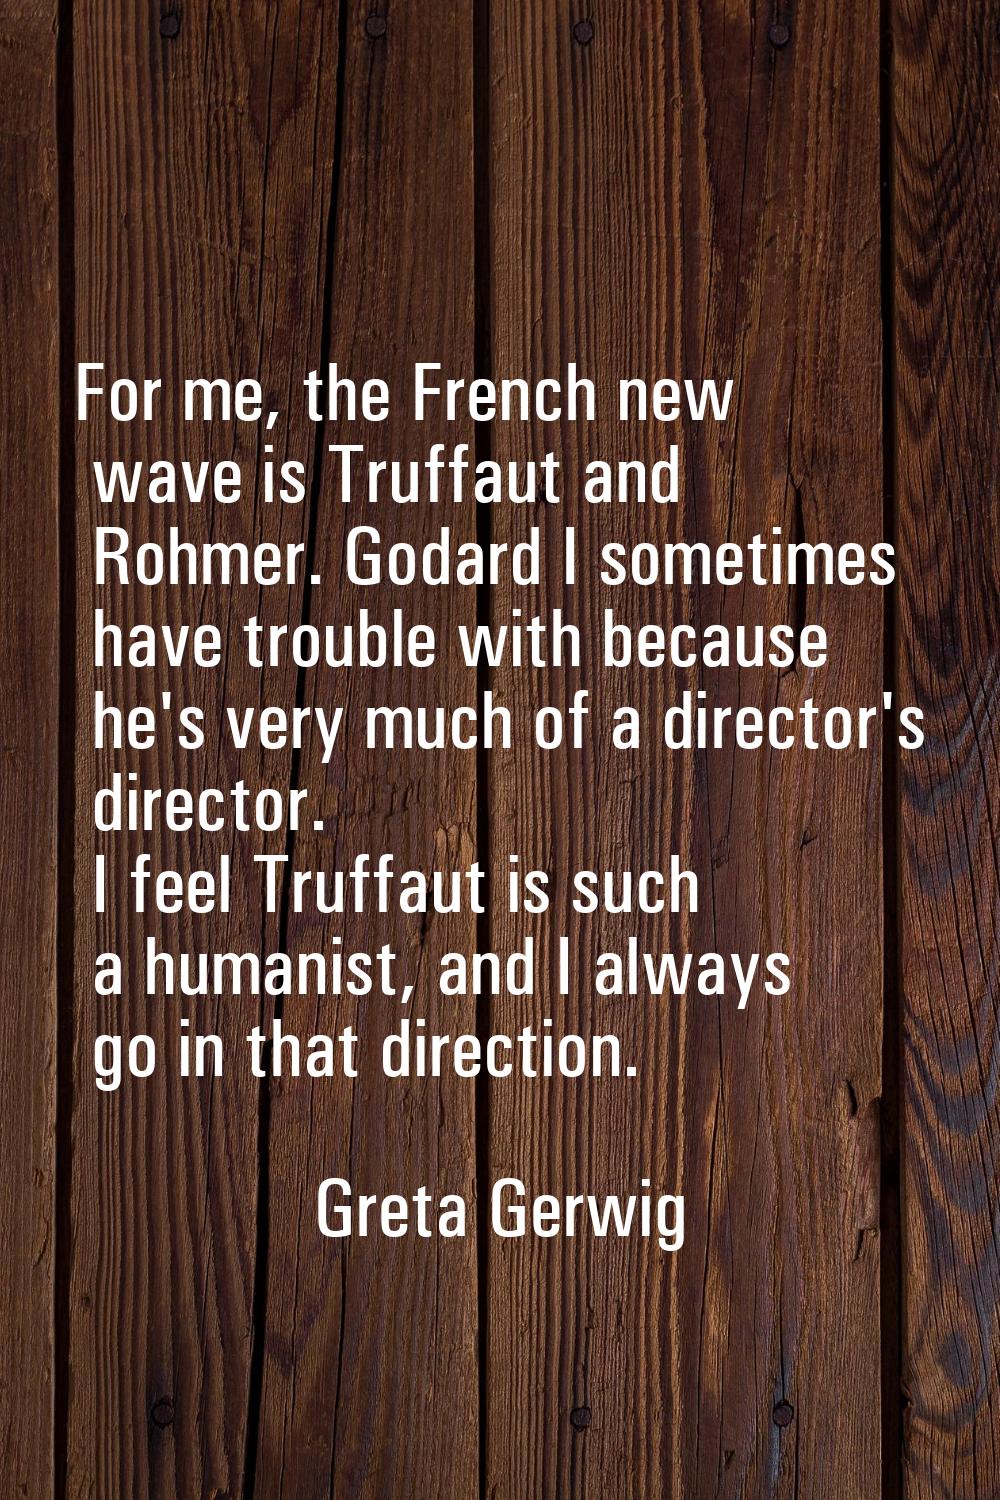 For me, the French new wave is Truffaut and Rohmer. Godard I sometimes have trouble with because he